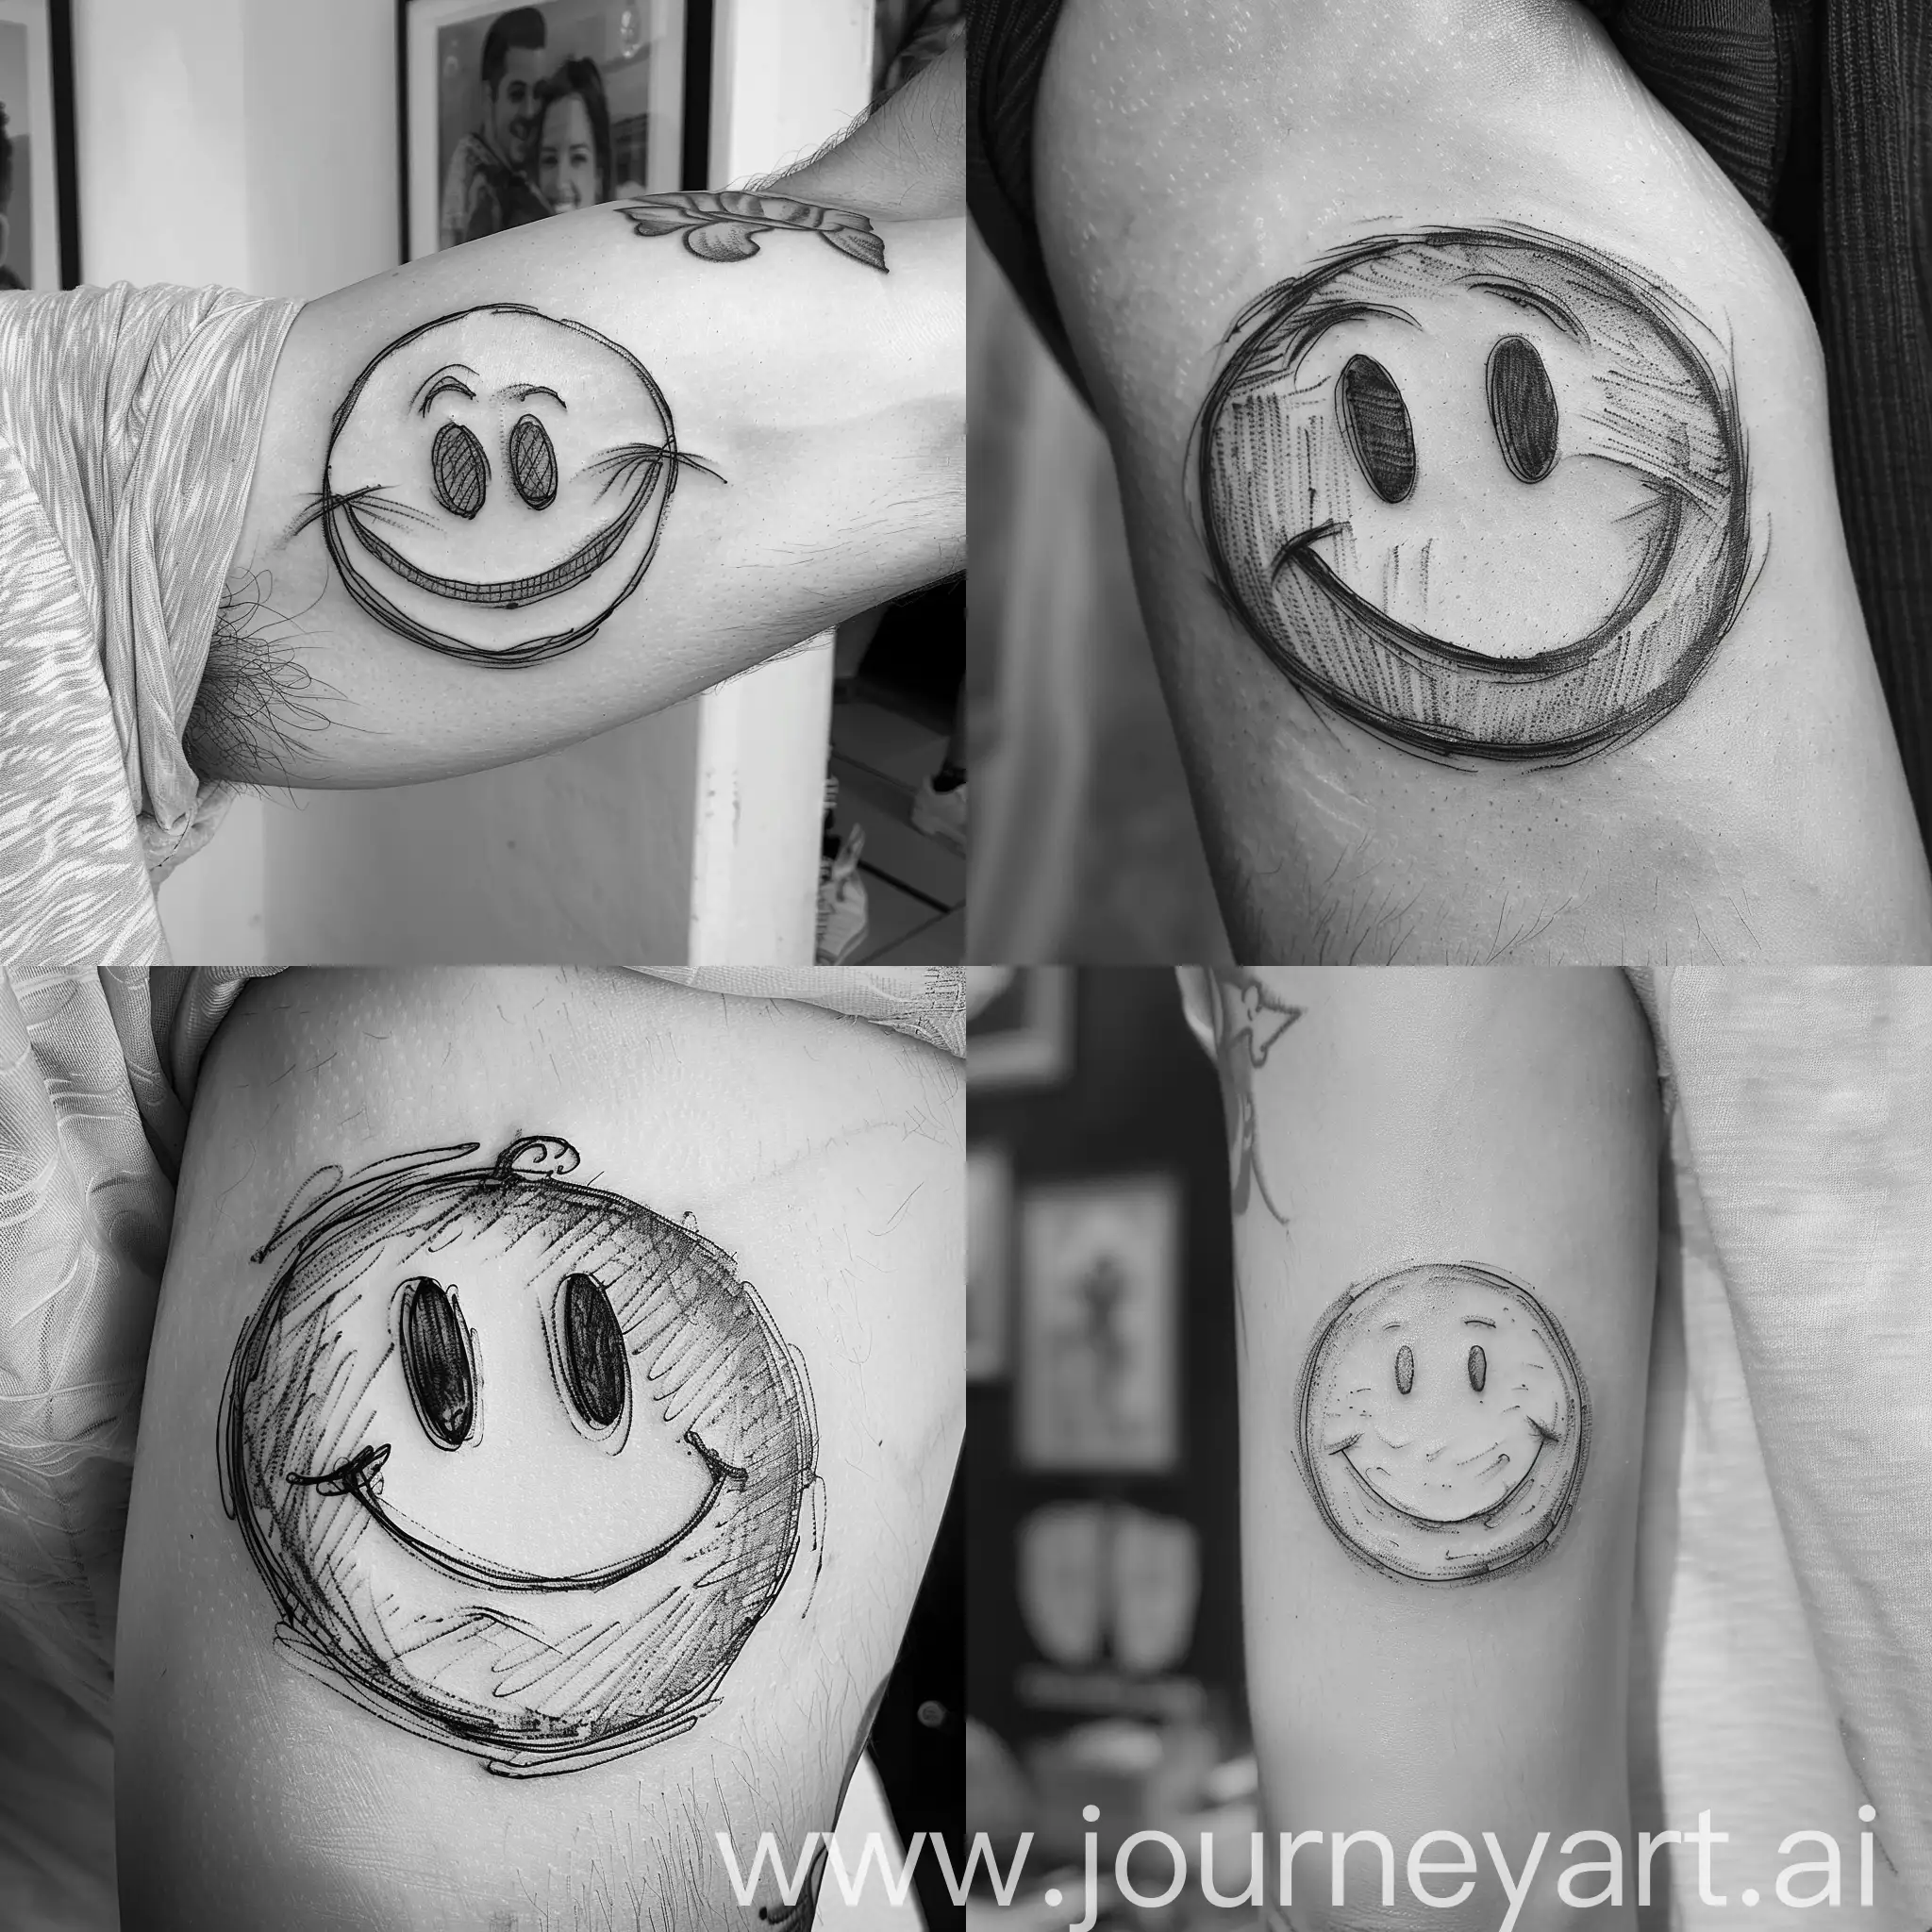 Cheerful-Tricep-Tattoo-Sketch-Smiley-Design